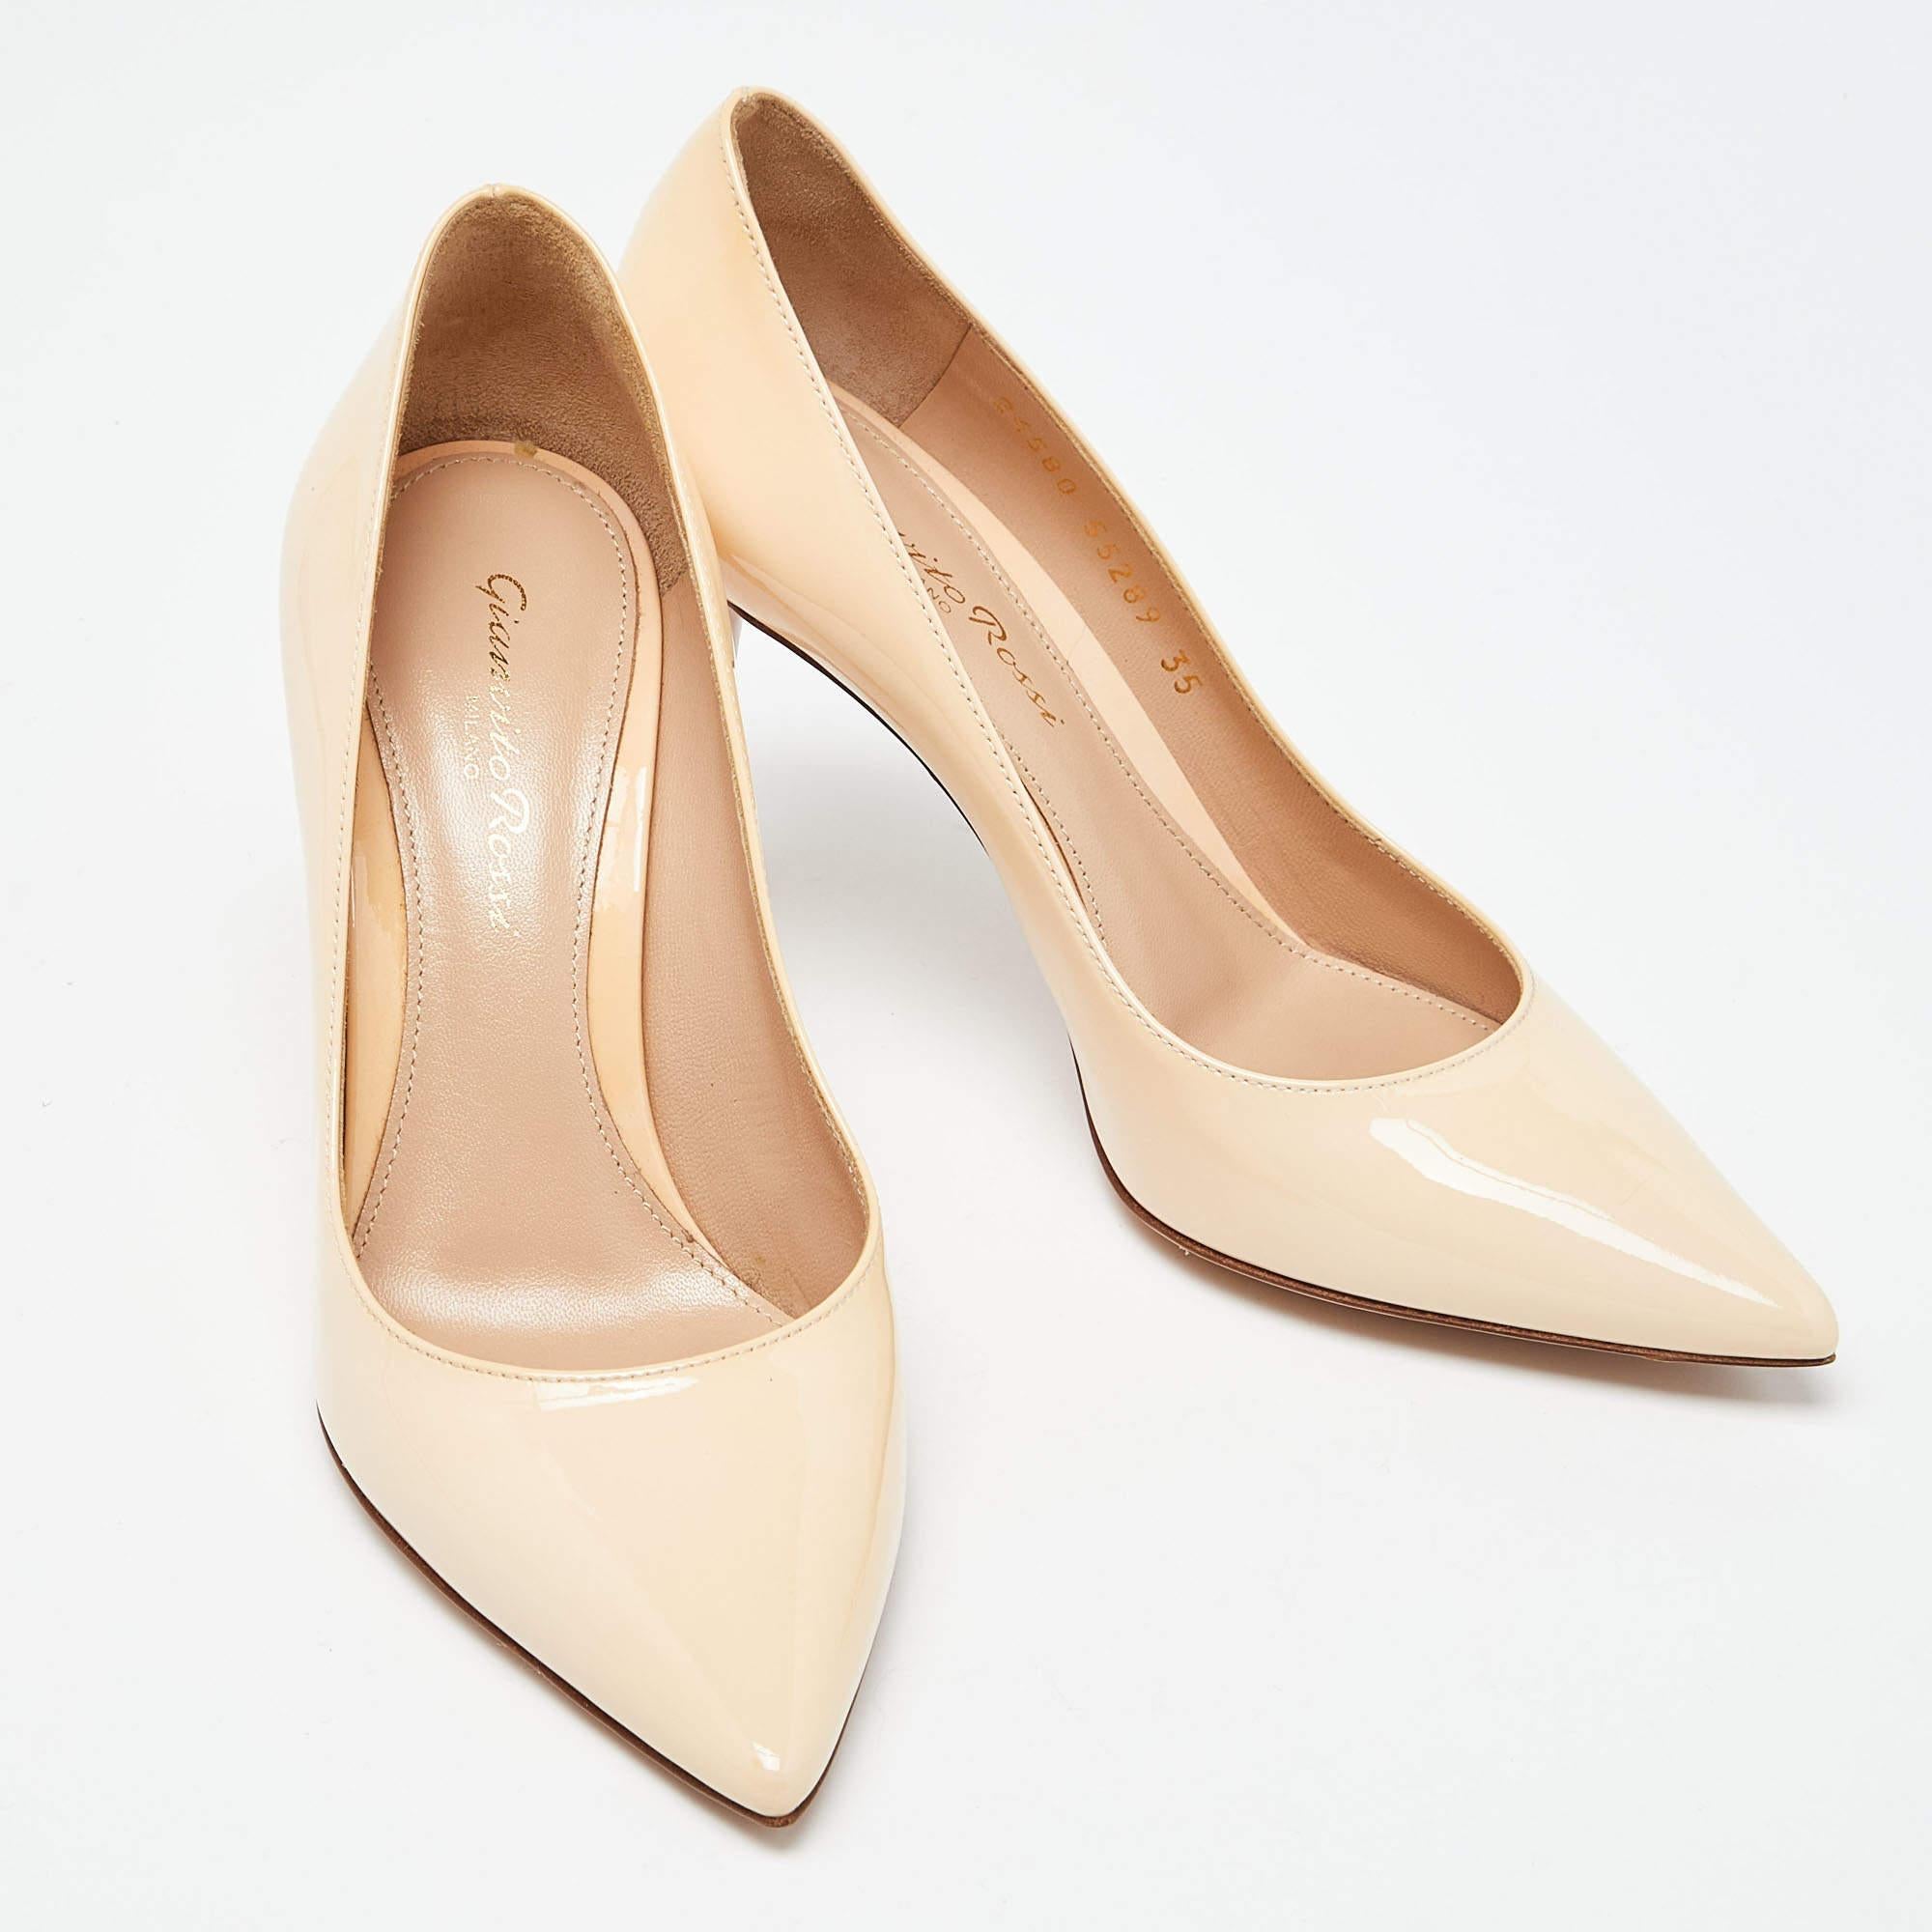 Gianvito Rossi Beige Patent Leather Gianvito 85 Pointed Toe Pumps Size 35 1